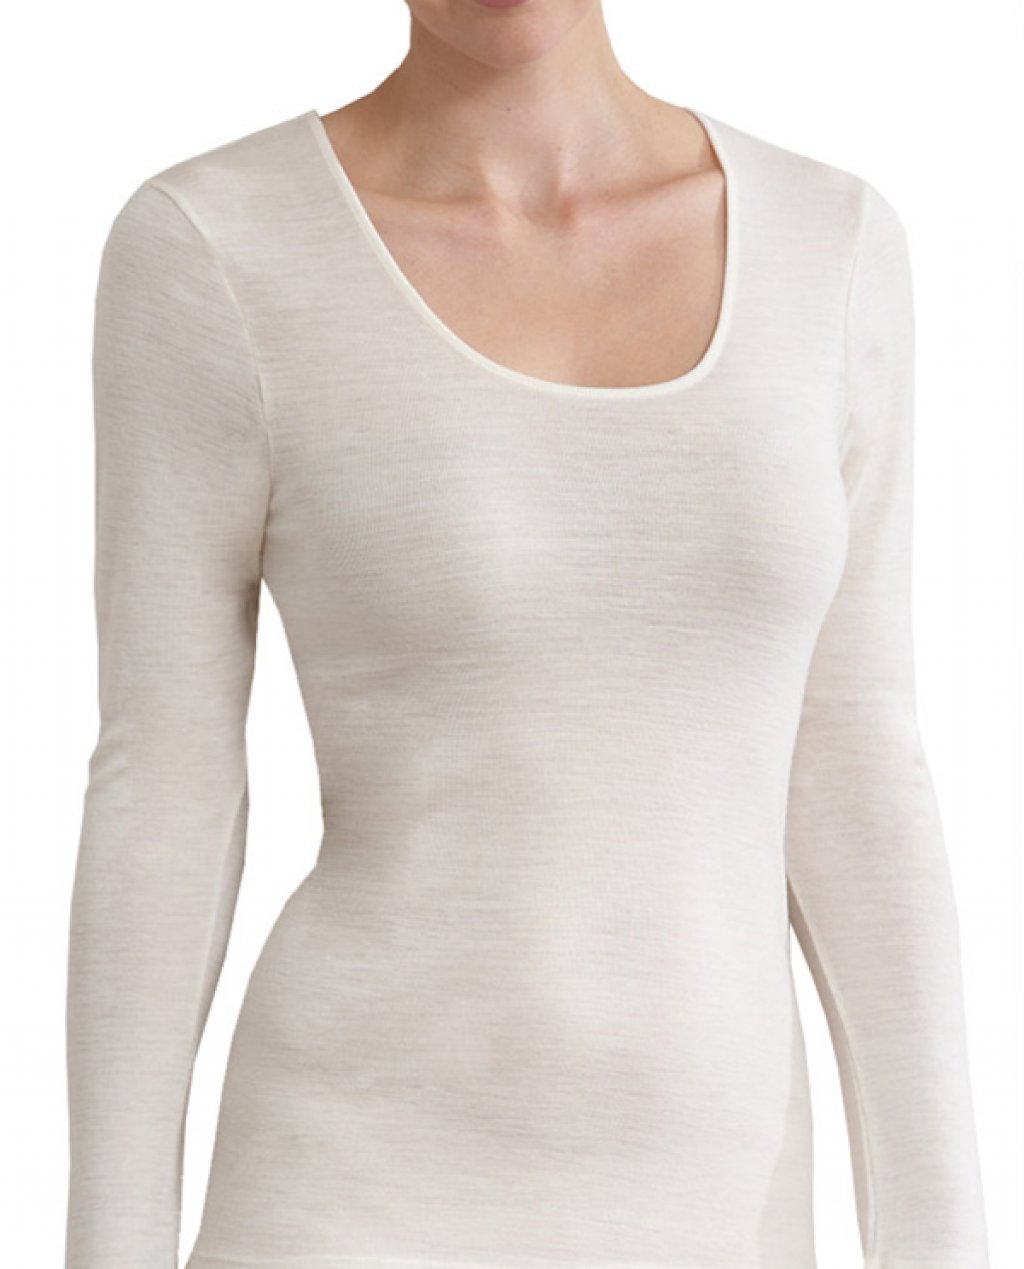 BaseLayers Thermal Underwear - Pure Merino Wool Long Sleeve B4401 - 3/4 & Long Sleeve Tops Ivory / 8 / XS  Available at Illusions Lingerie